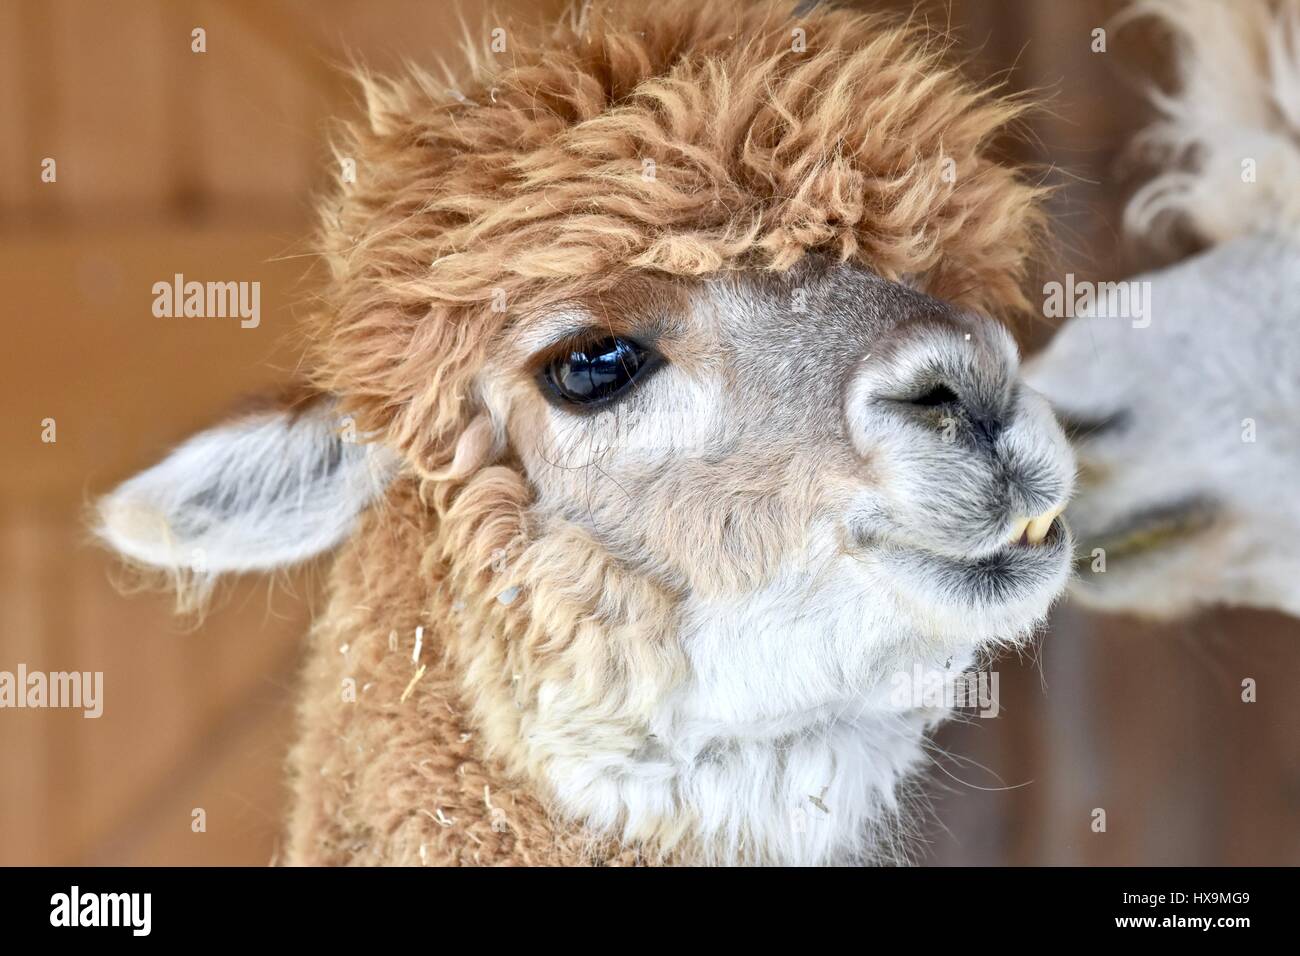 Baltimore, USA. 25th March 2017. An adorable Alpaca (Vicugna pacos) making funny faces at the Maryland zoo. Photo credit: Jeramey lende/ Alamy Live News Stock Photo